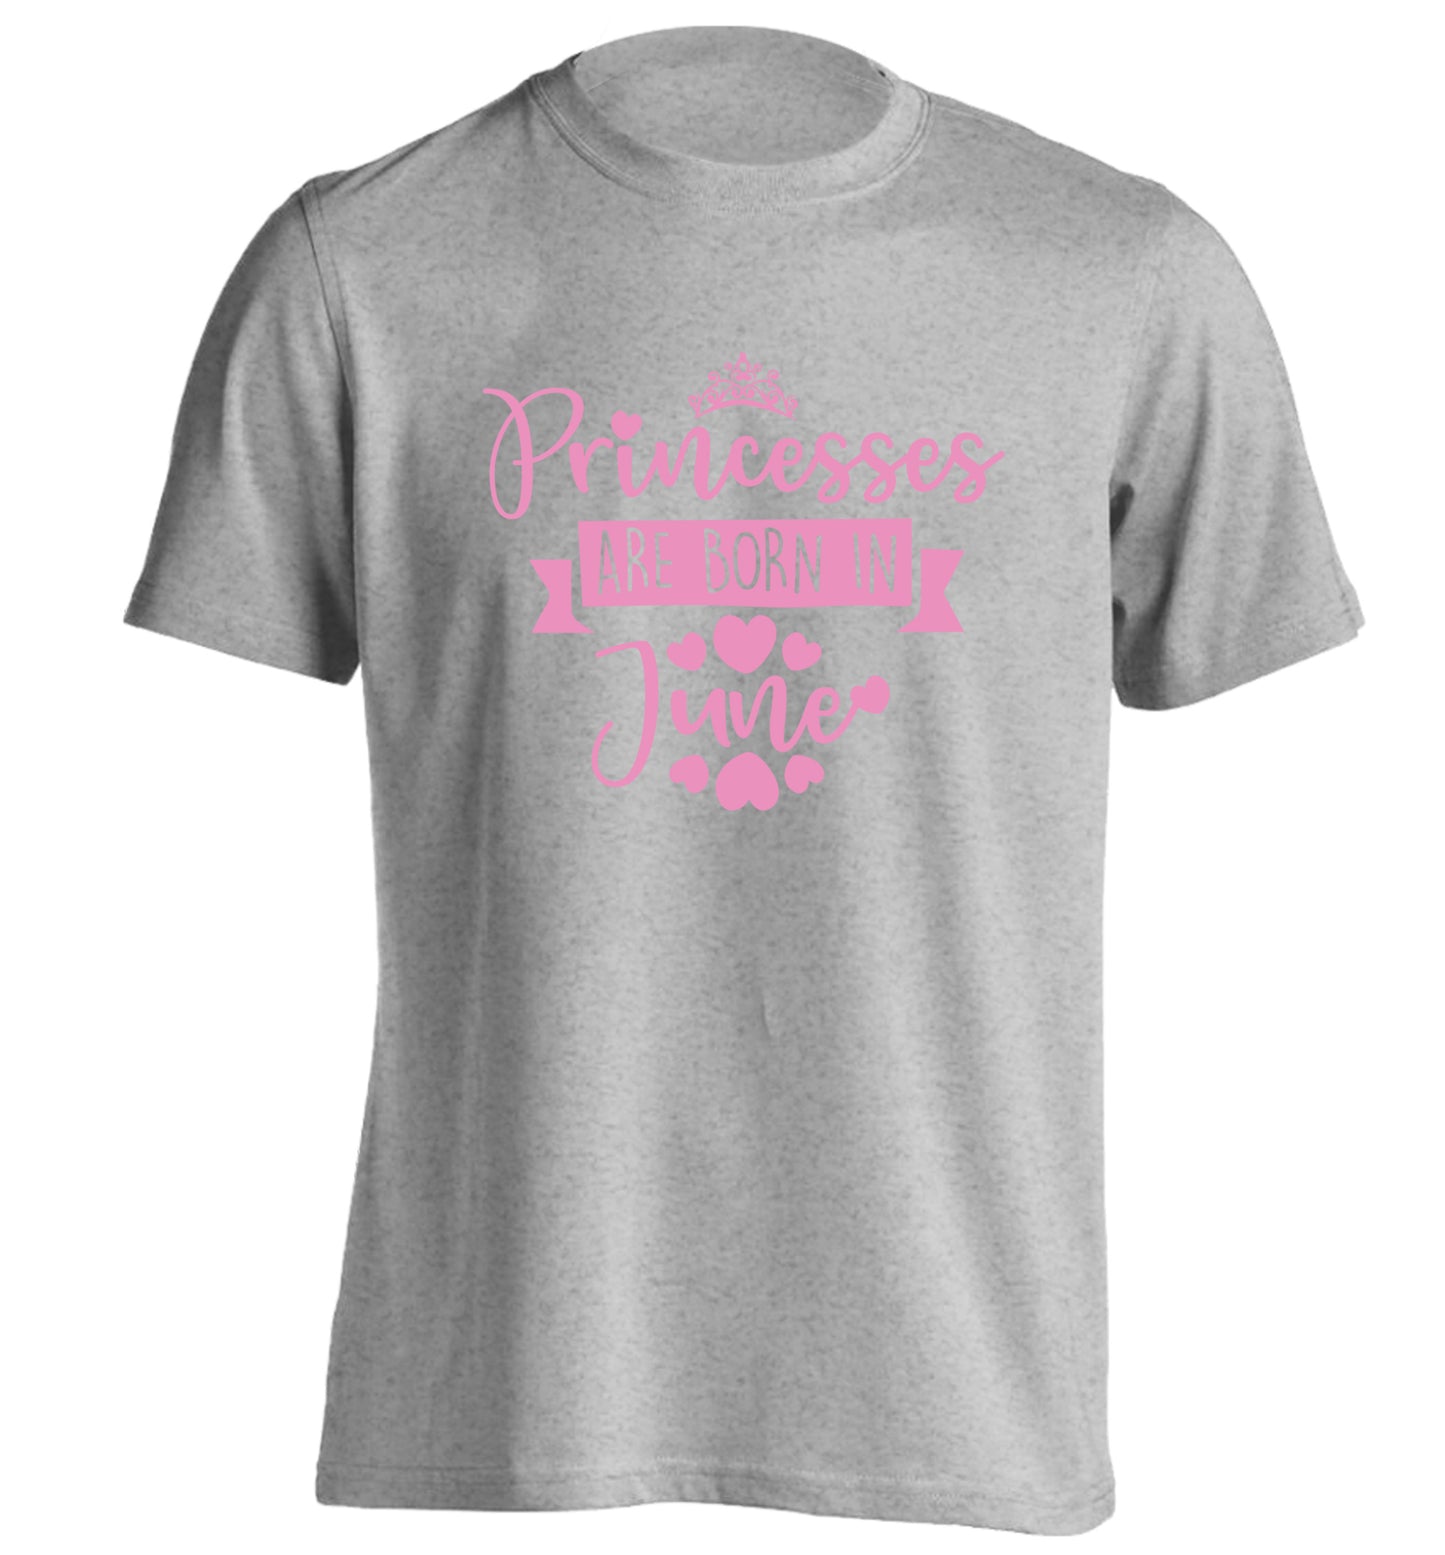 Princesses are born in June adults unisex grey Tshirt 2XL